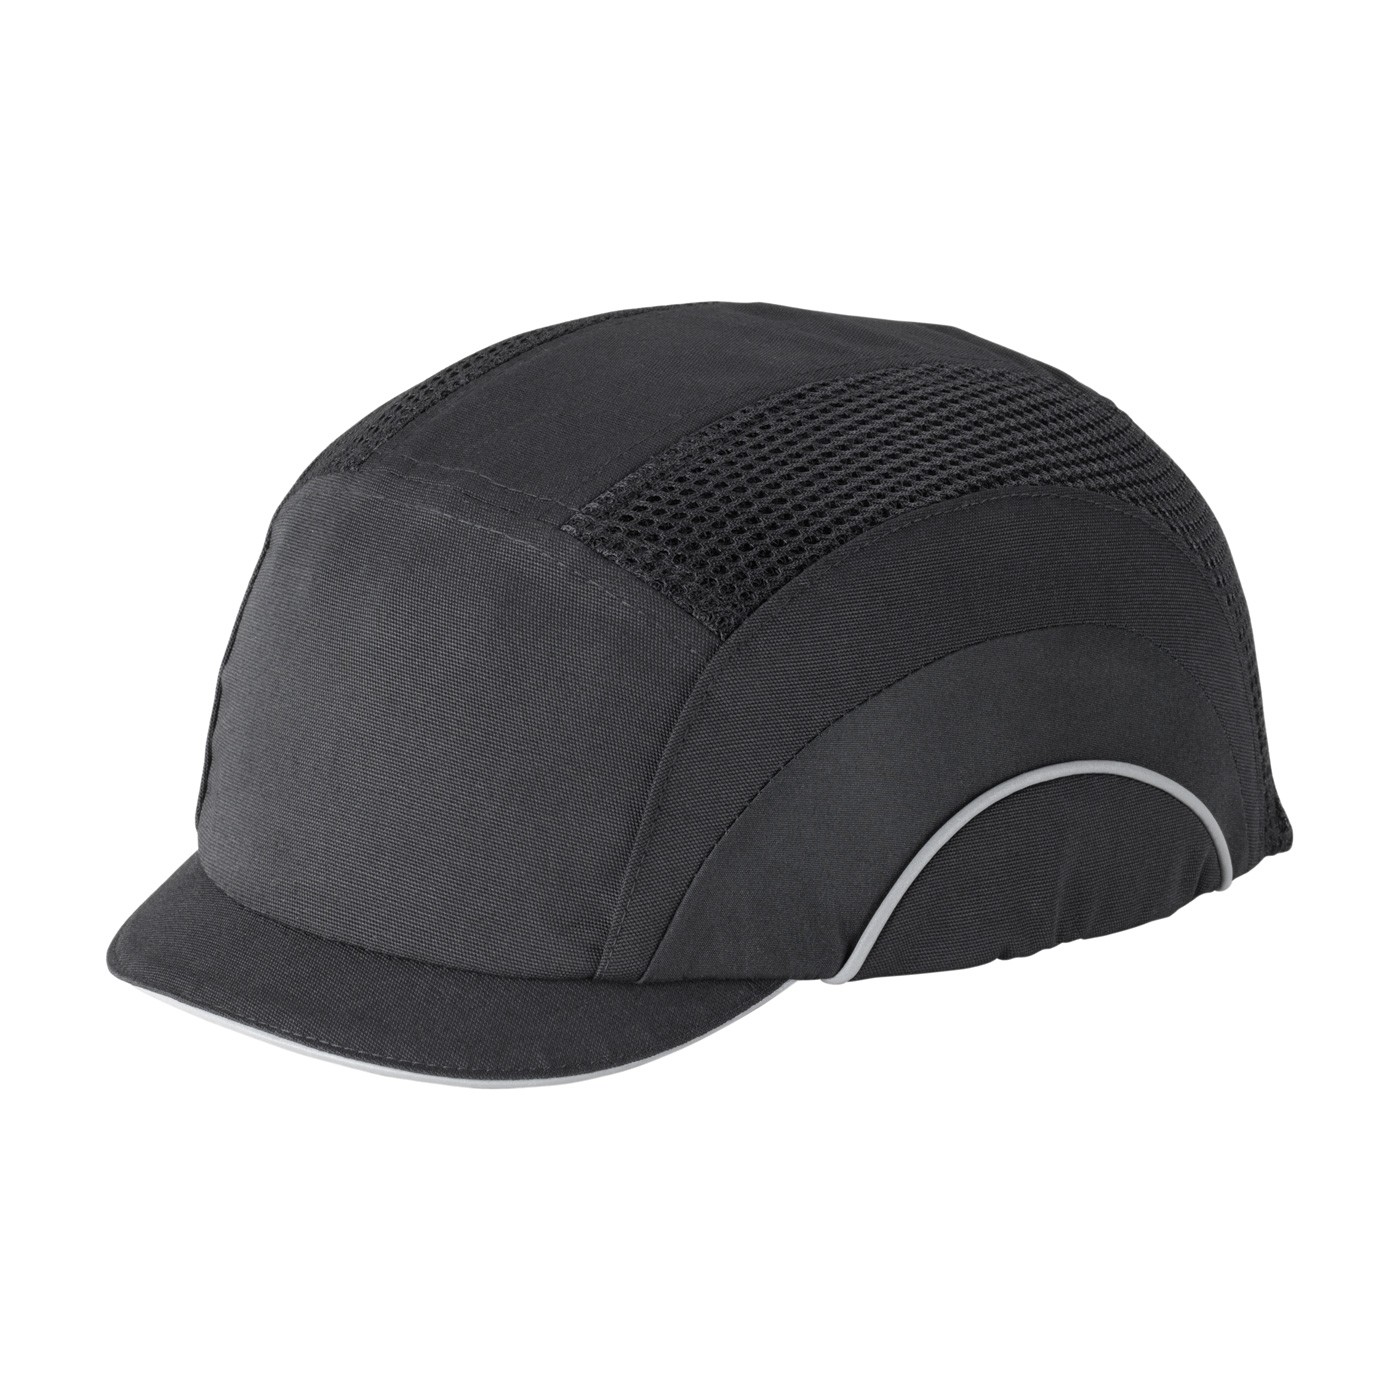 HardCap A1+™ Baseball Style Bump Cap with HDPE Protective Liner and Adjustable Back - Micro Brim  (#282-ABM130)